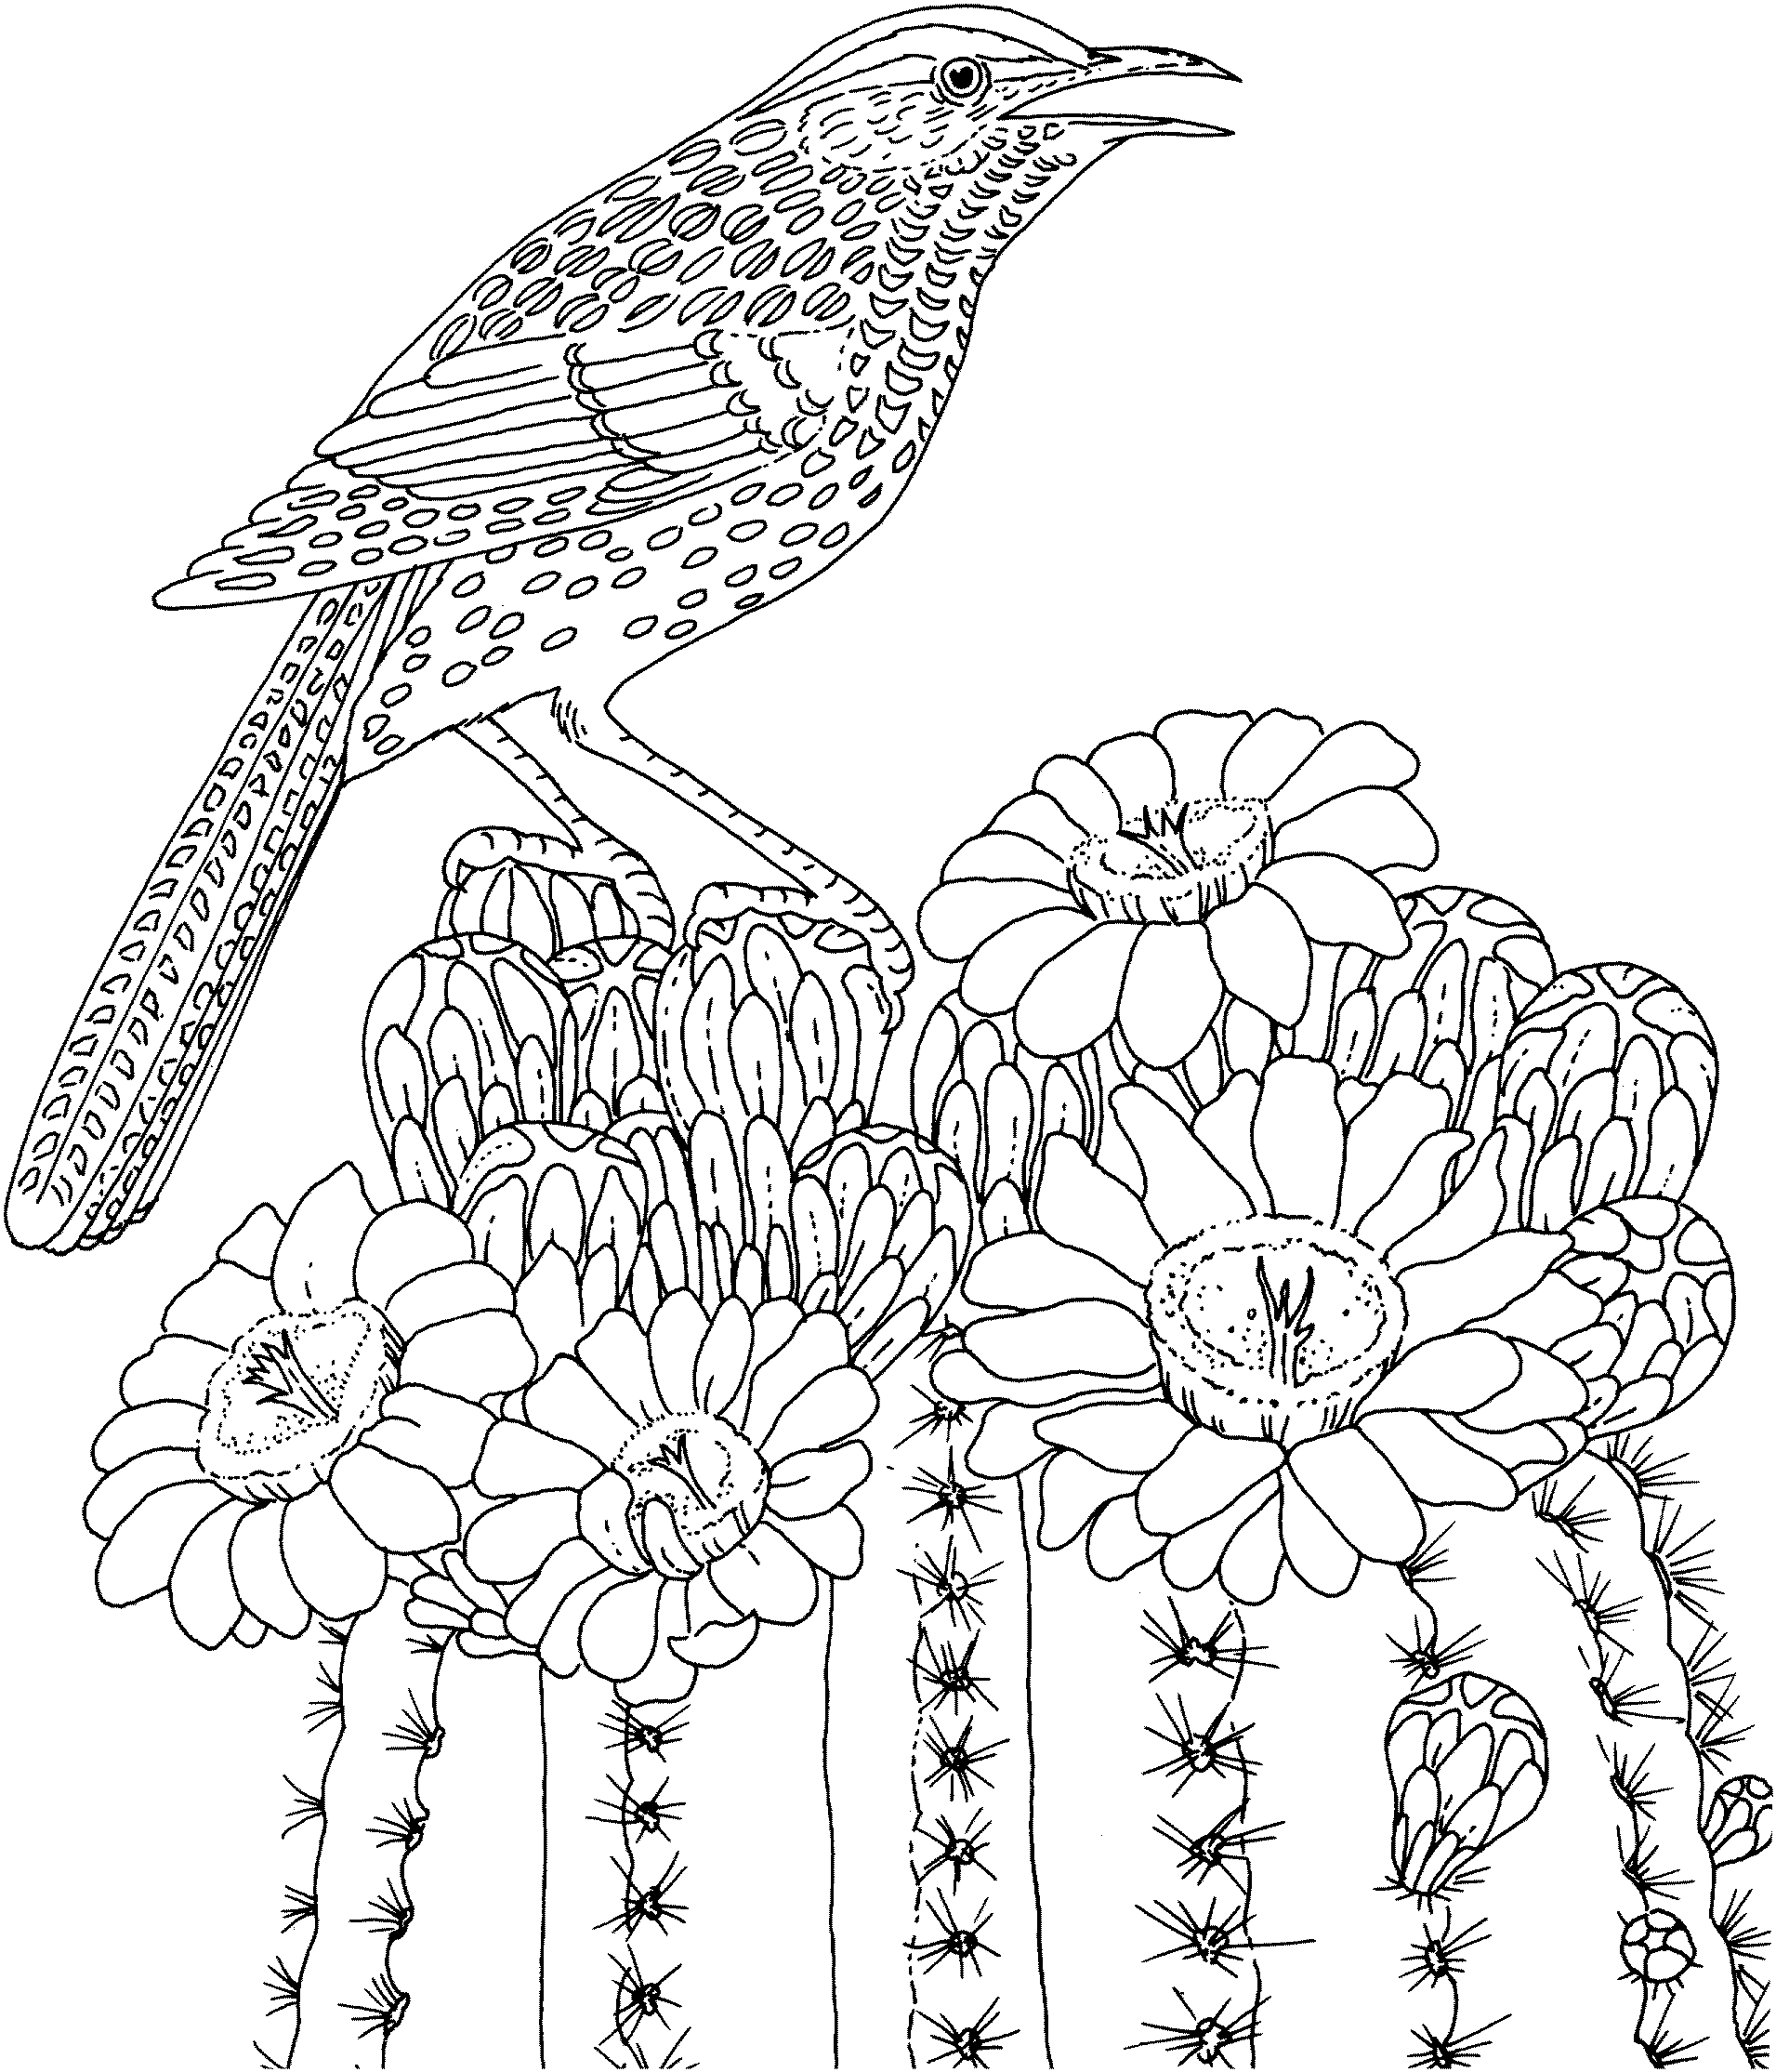 Difficult Coloring Pages Free Intricate Coloring Pages ...